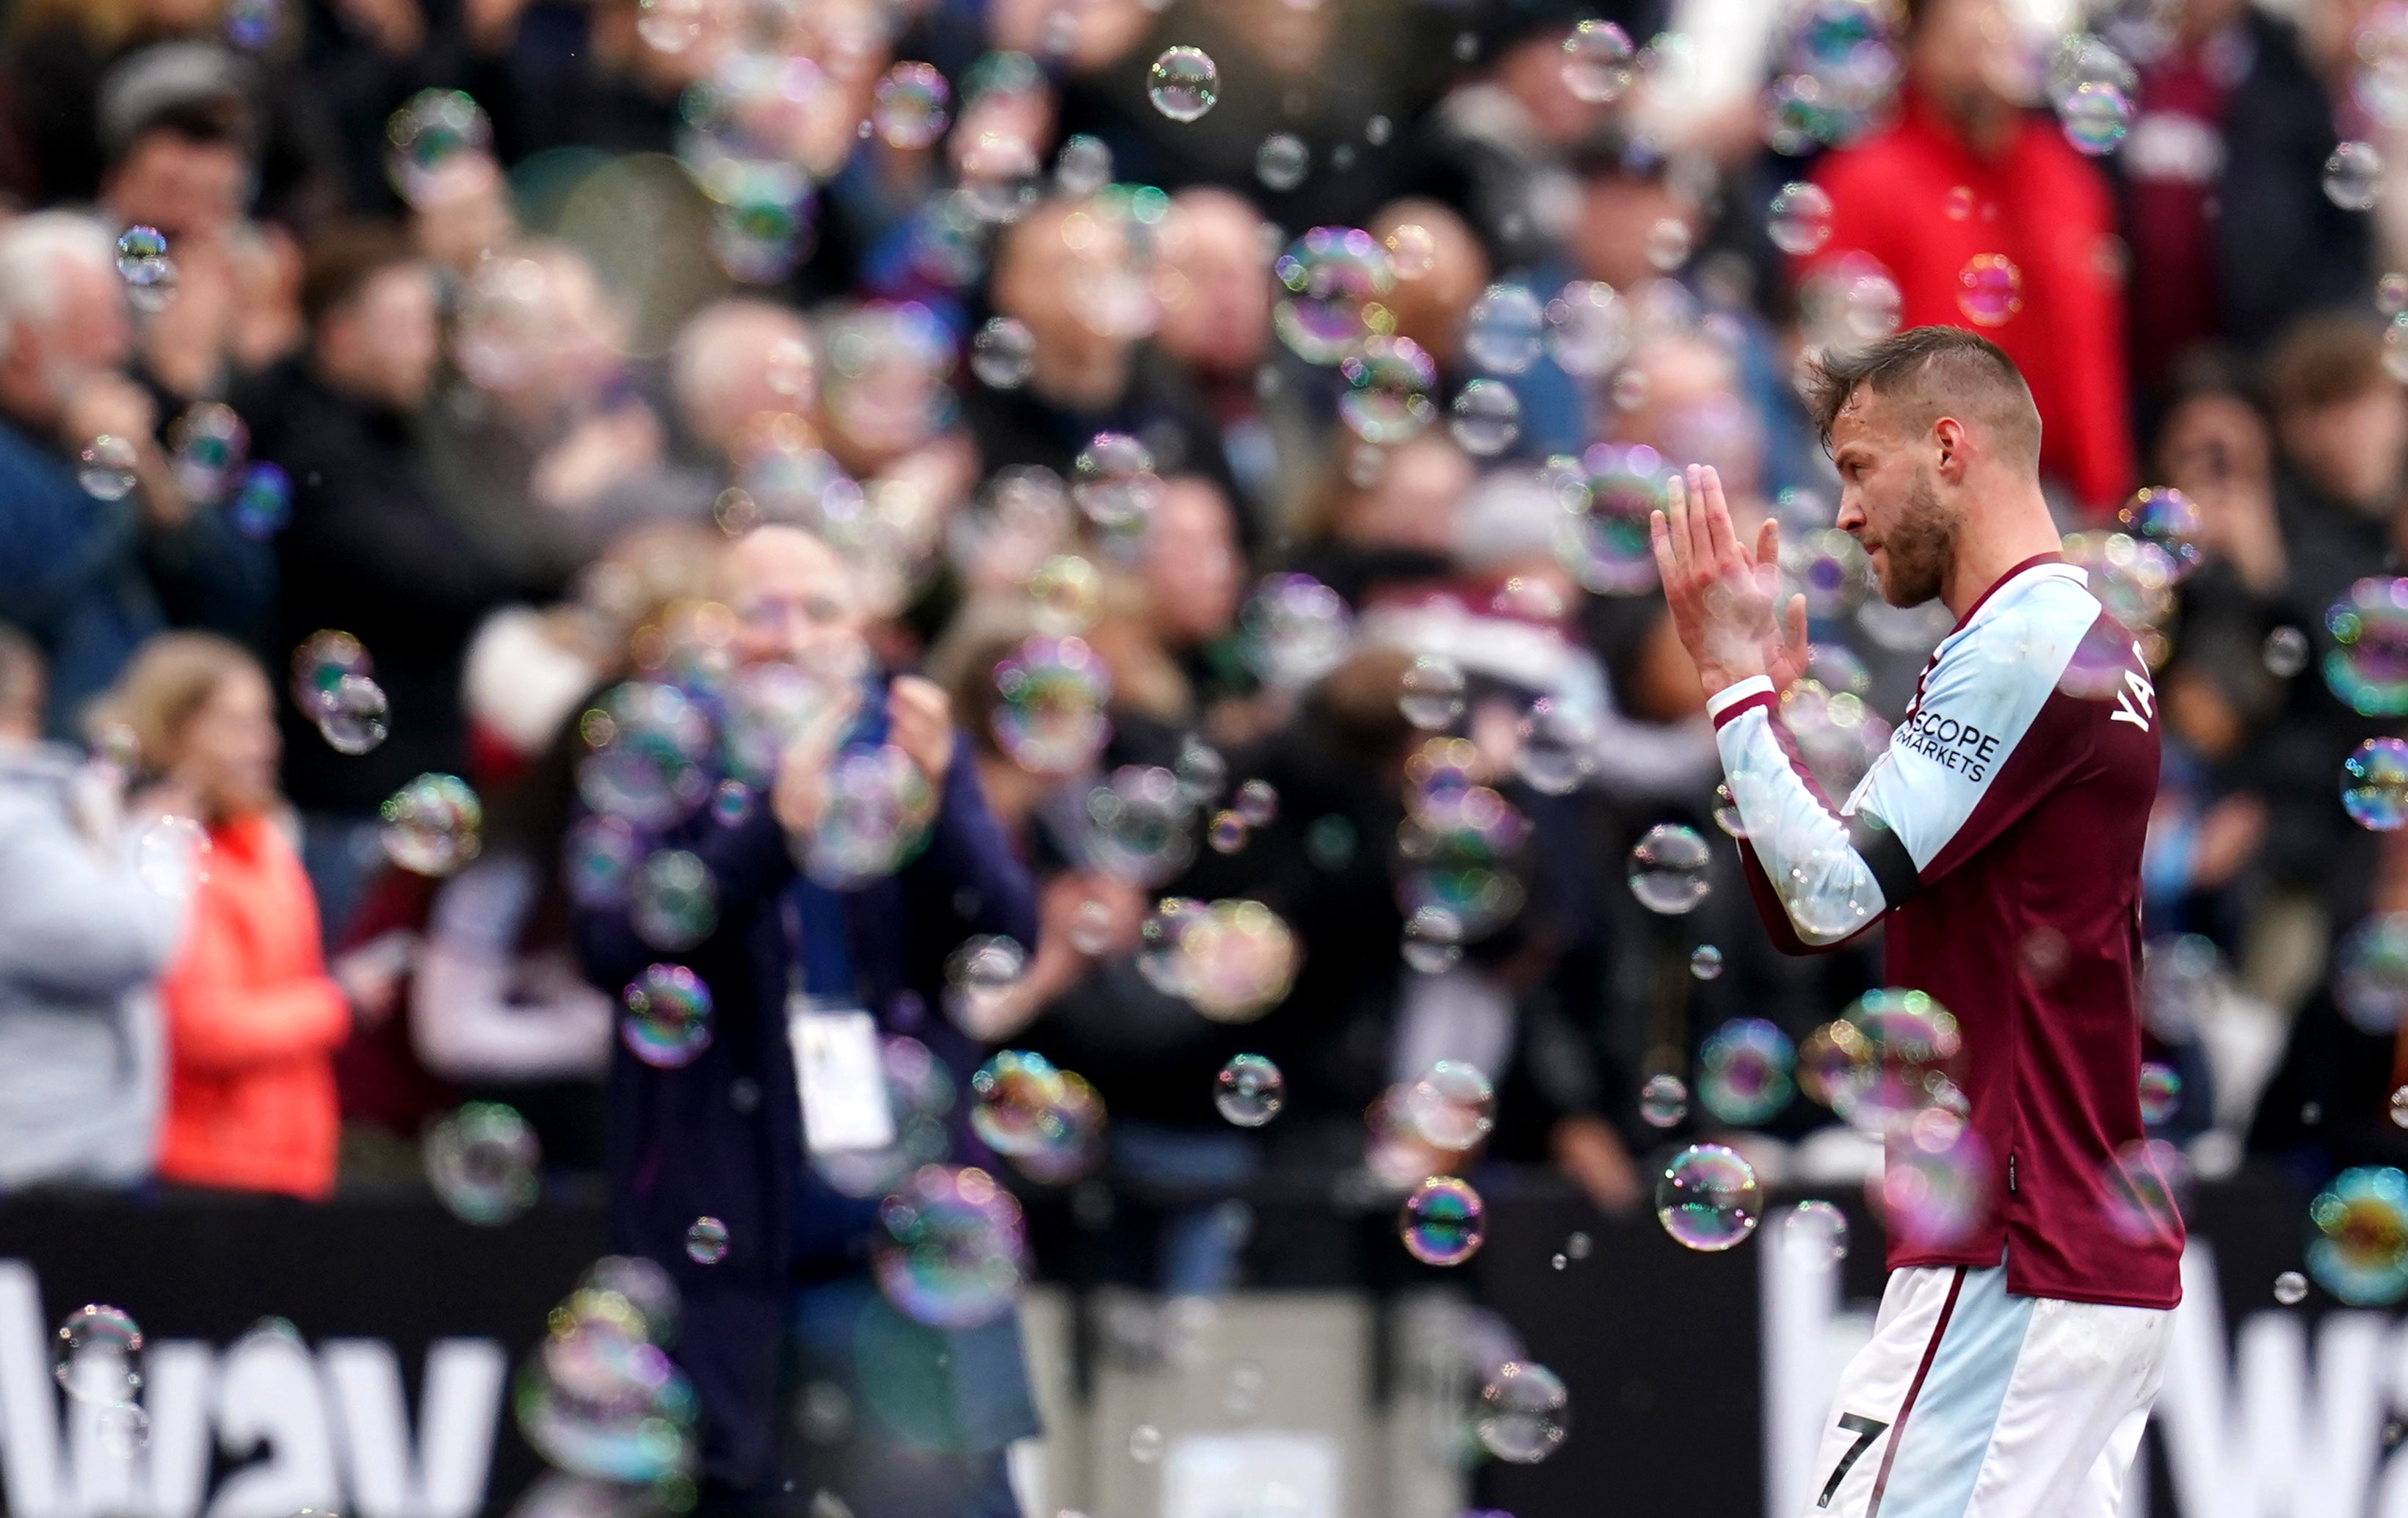 Andriy Yarmolenko acknowledges the crowd after his emotional goalscoring appearance for West Ham (John Walton/PA)